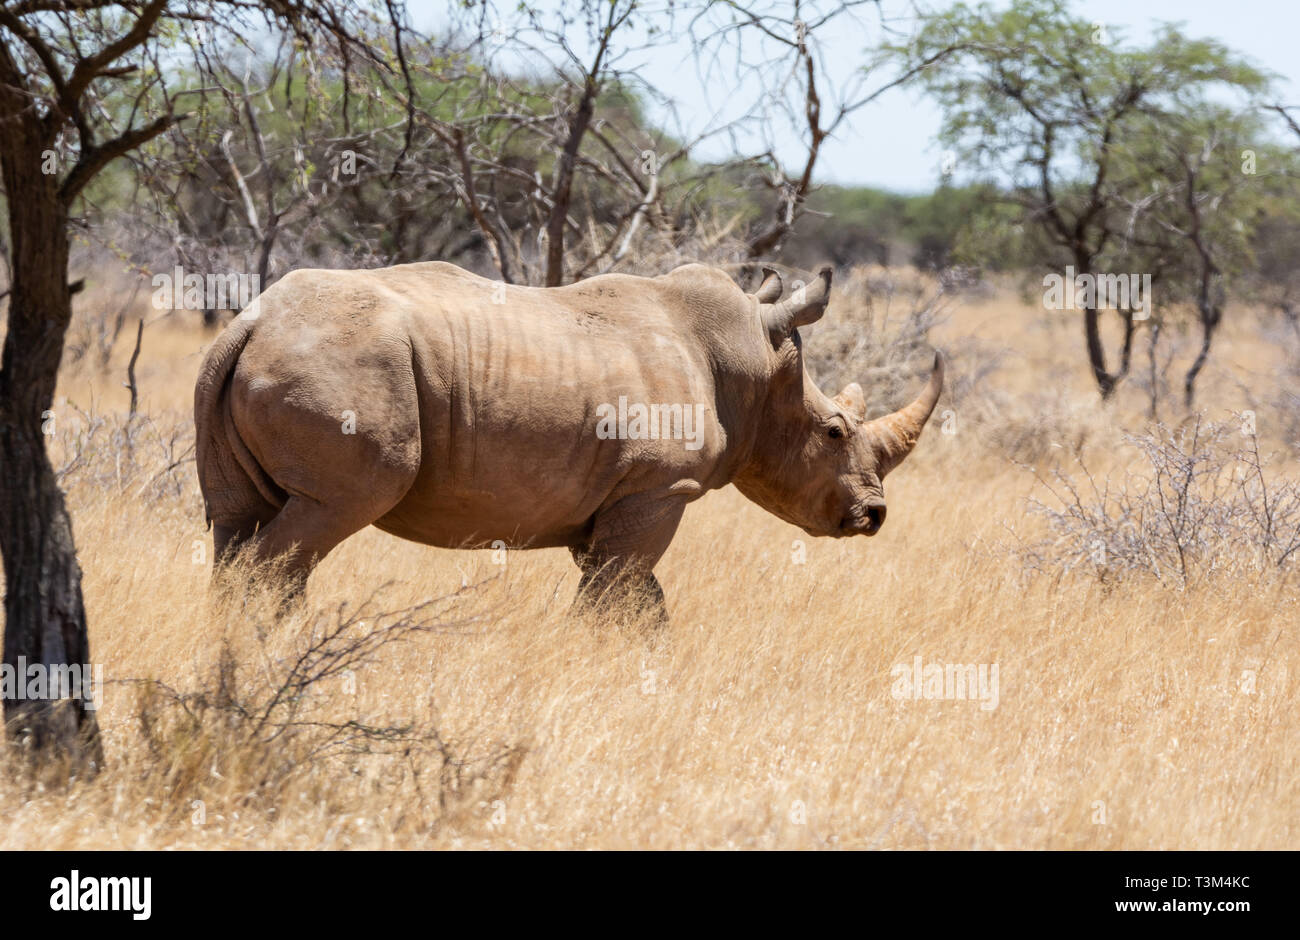 An adult White Rhino in Southern African savanna Stock Photo